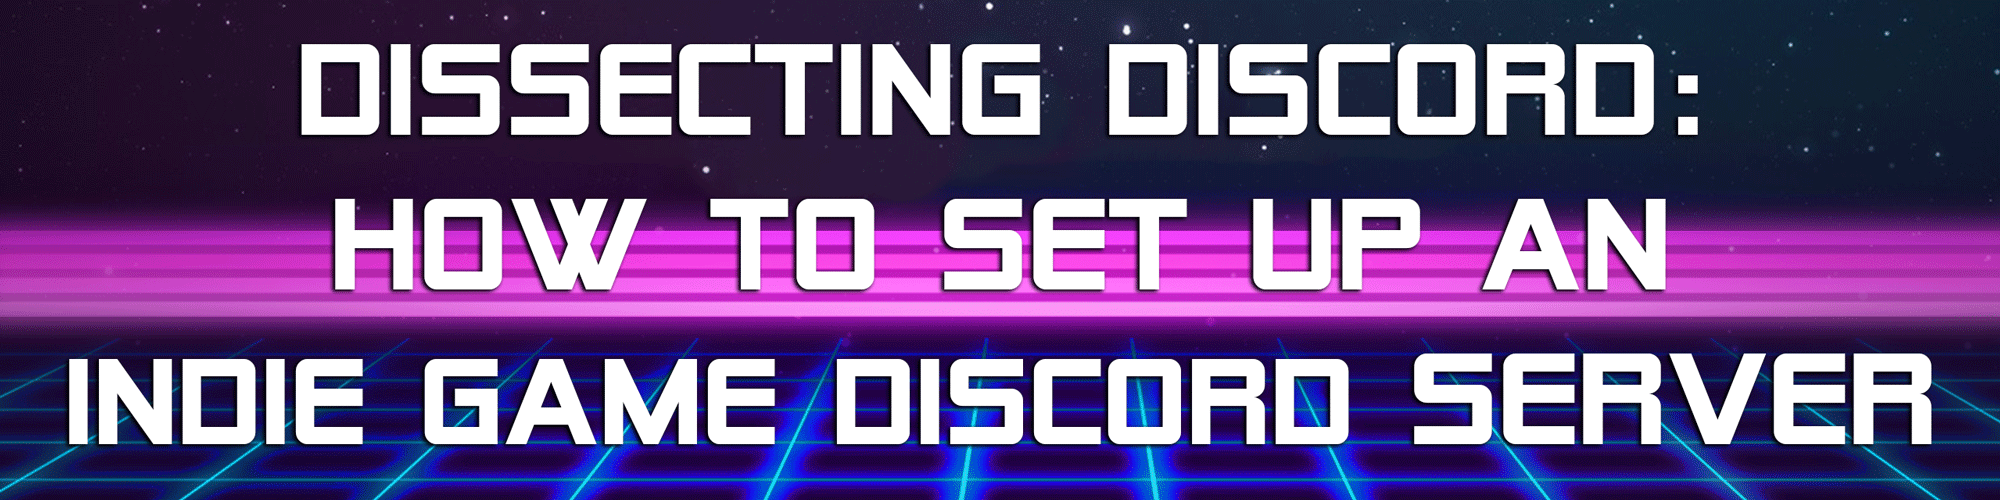 Dissecting Discord How To Set Up An Indie Game Discord Server Akupara Games